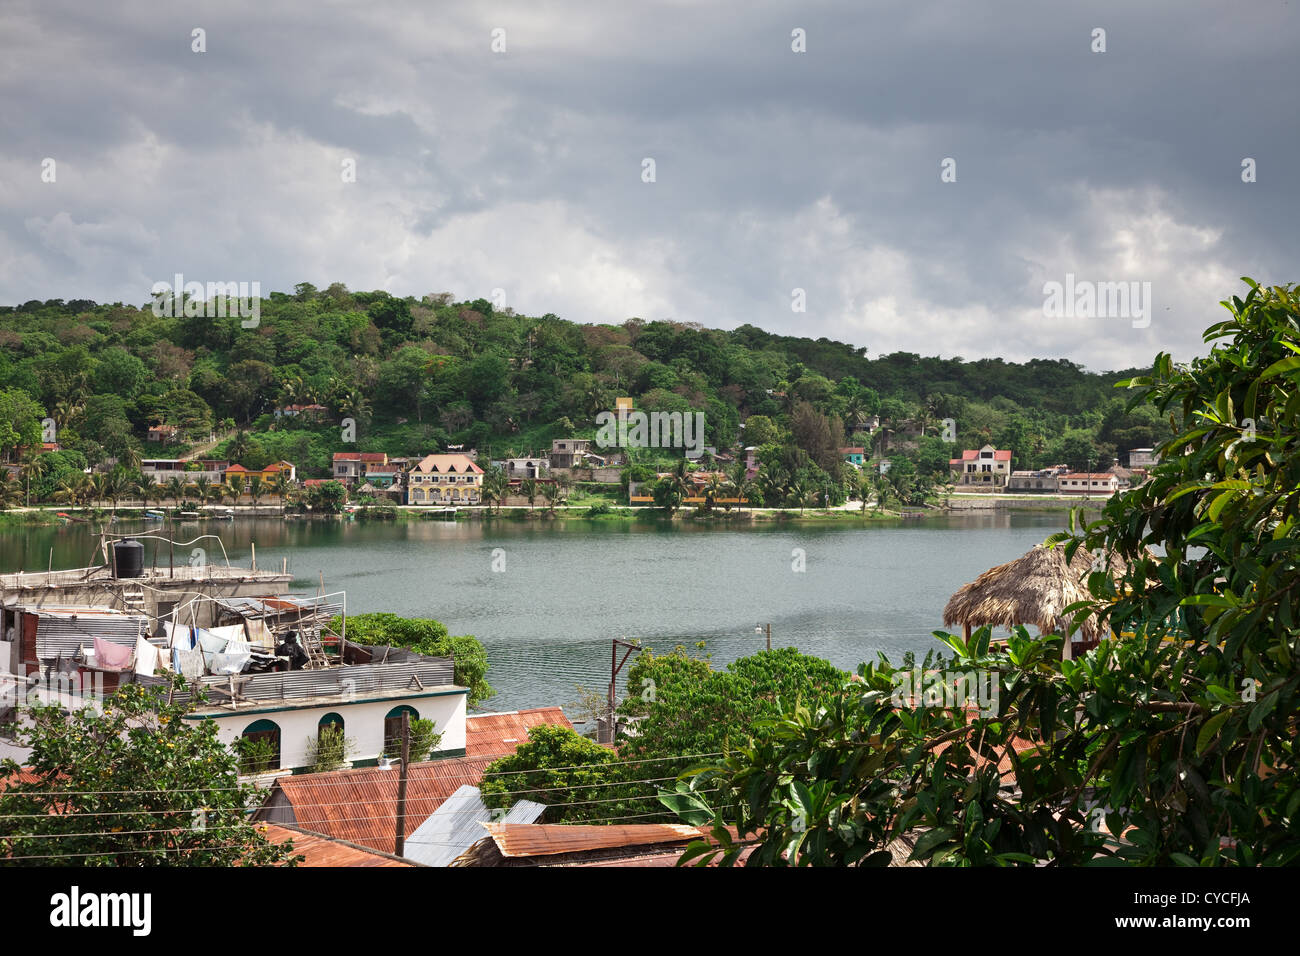 The charming little island of Flores in Lake Peten Itza is a welcome distraction that has a real laidback feel. Stock Photo